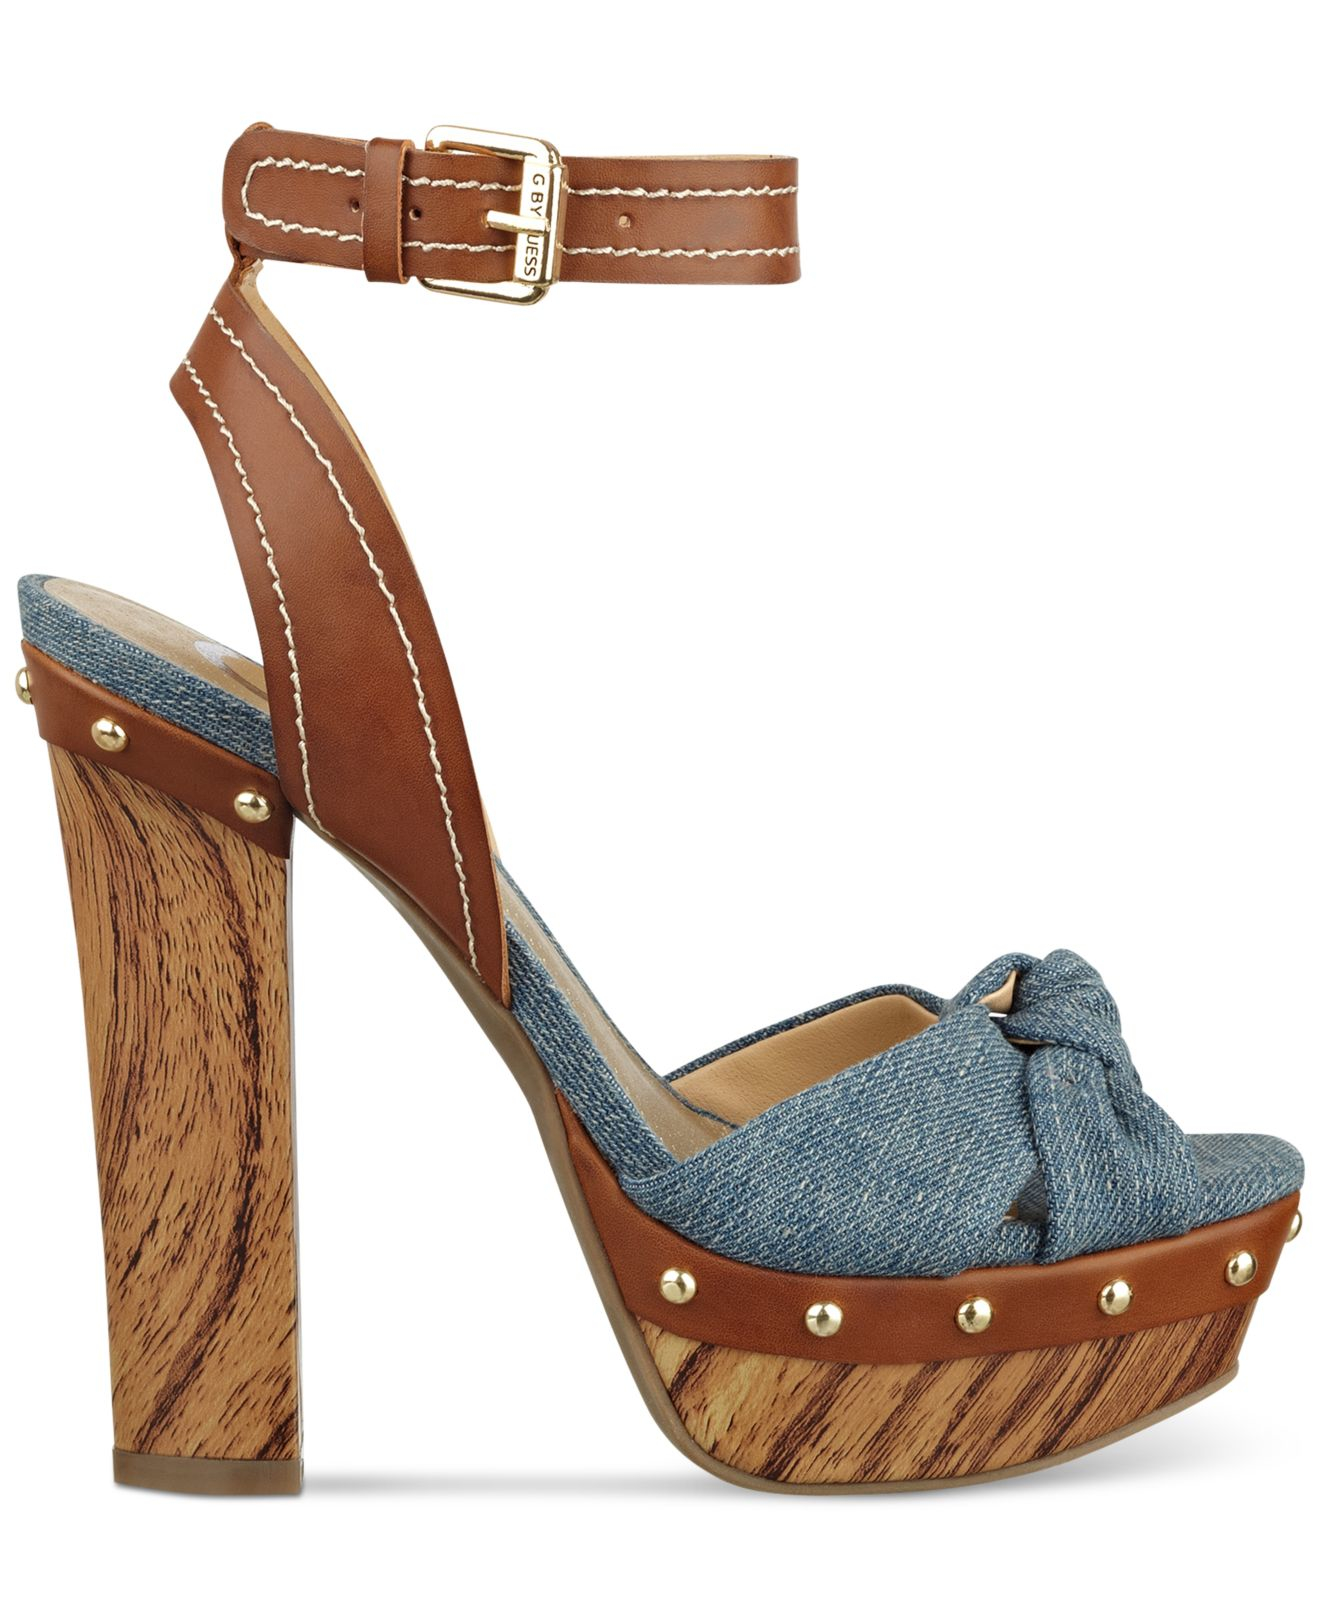 G by Guess Revail Wooden Platform Sandals in Brown Lyst